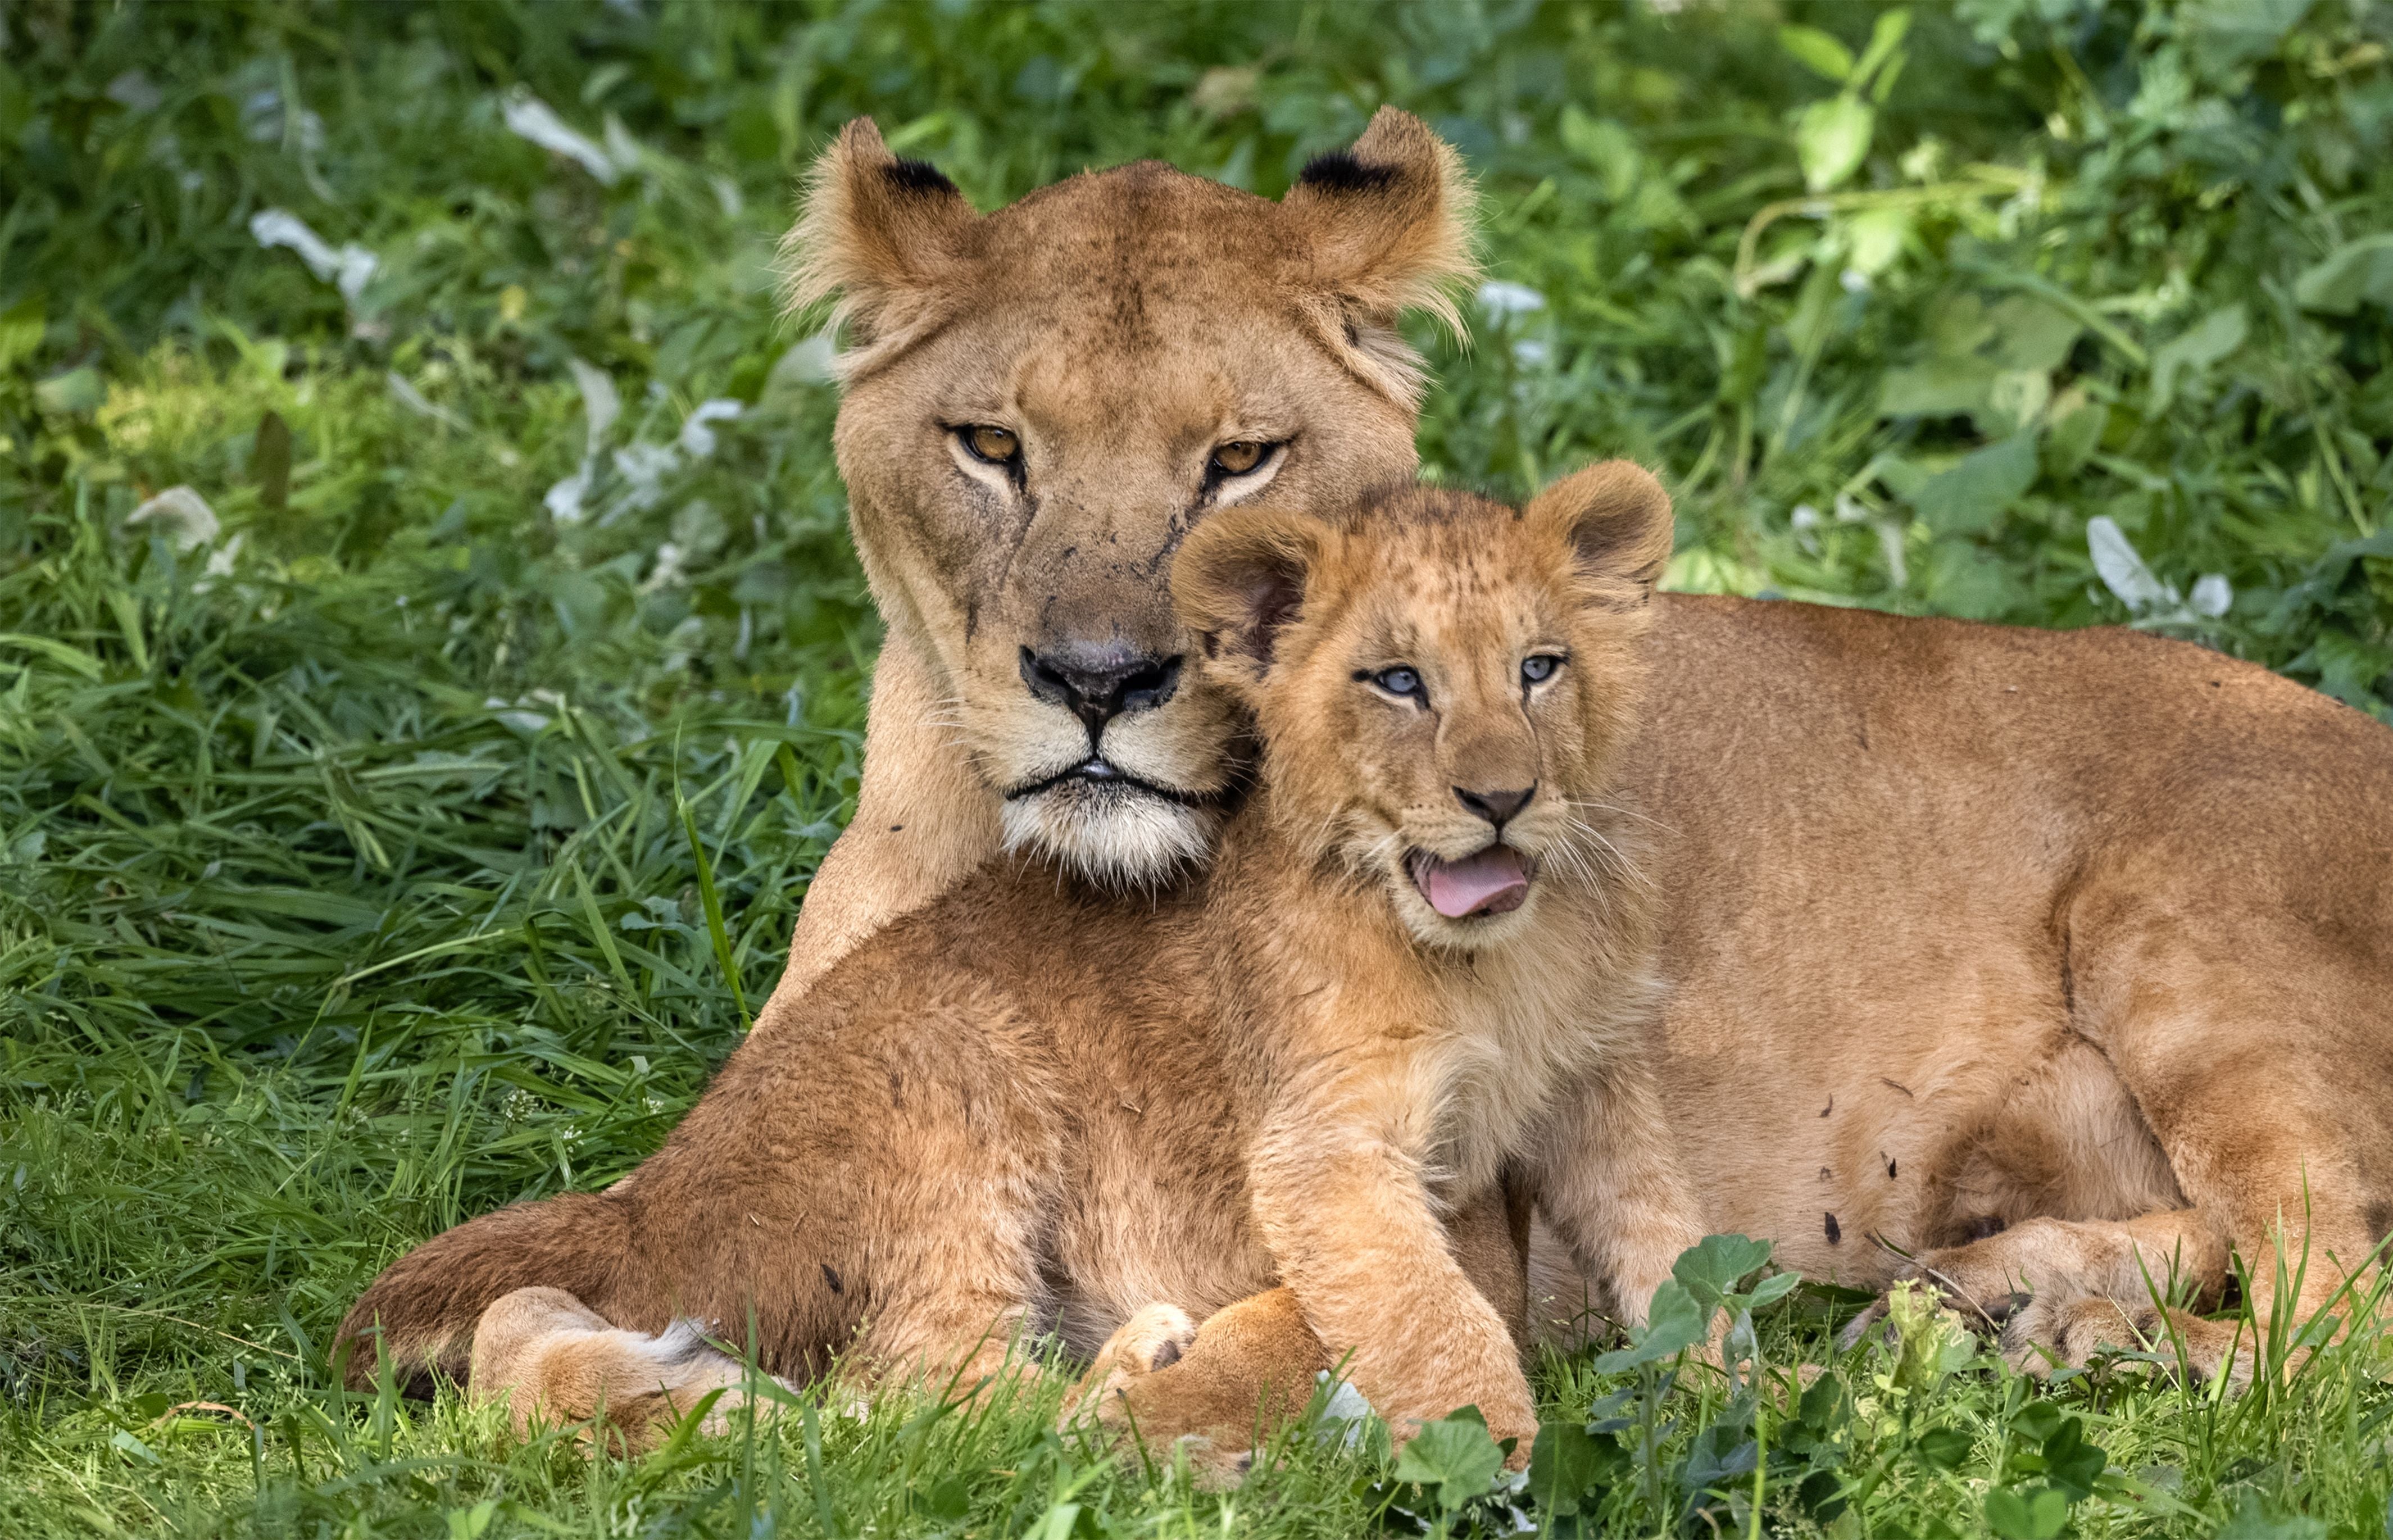 A Barbary lionesss and her cub at the Rabat Zoo in Morocco  (Photo: FADEL SENNA/AFP, Getty Images)